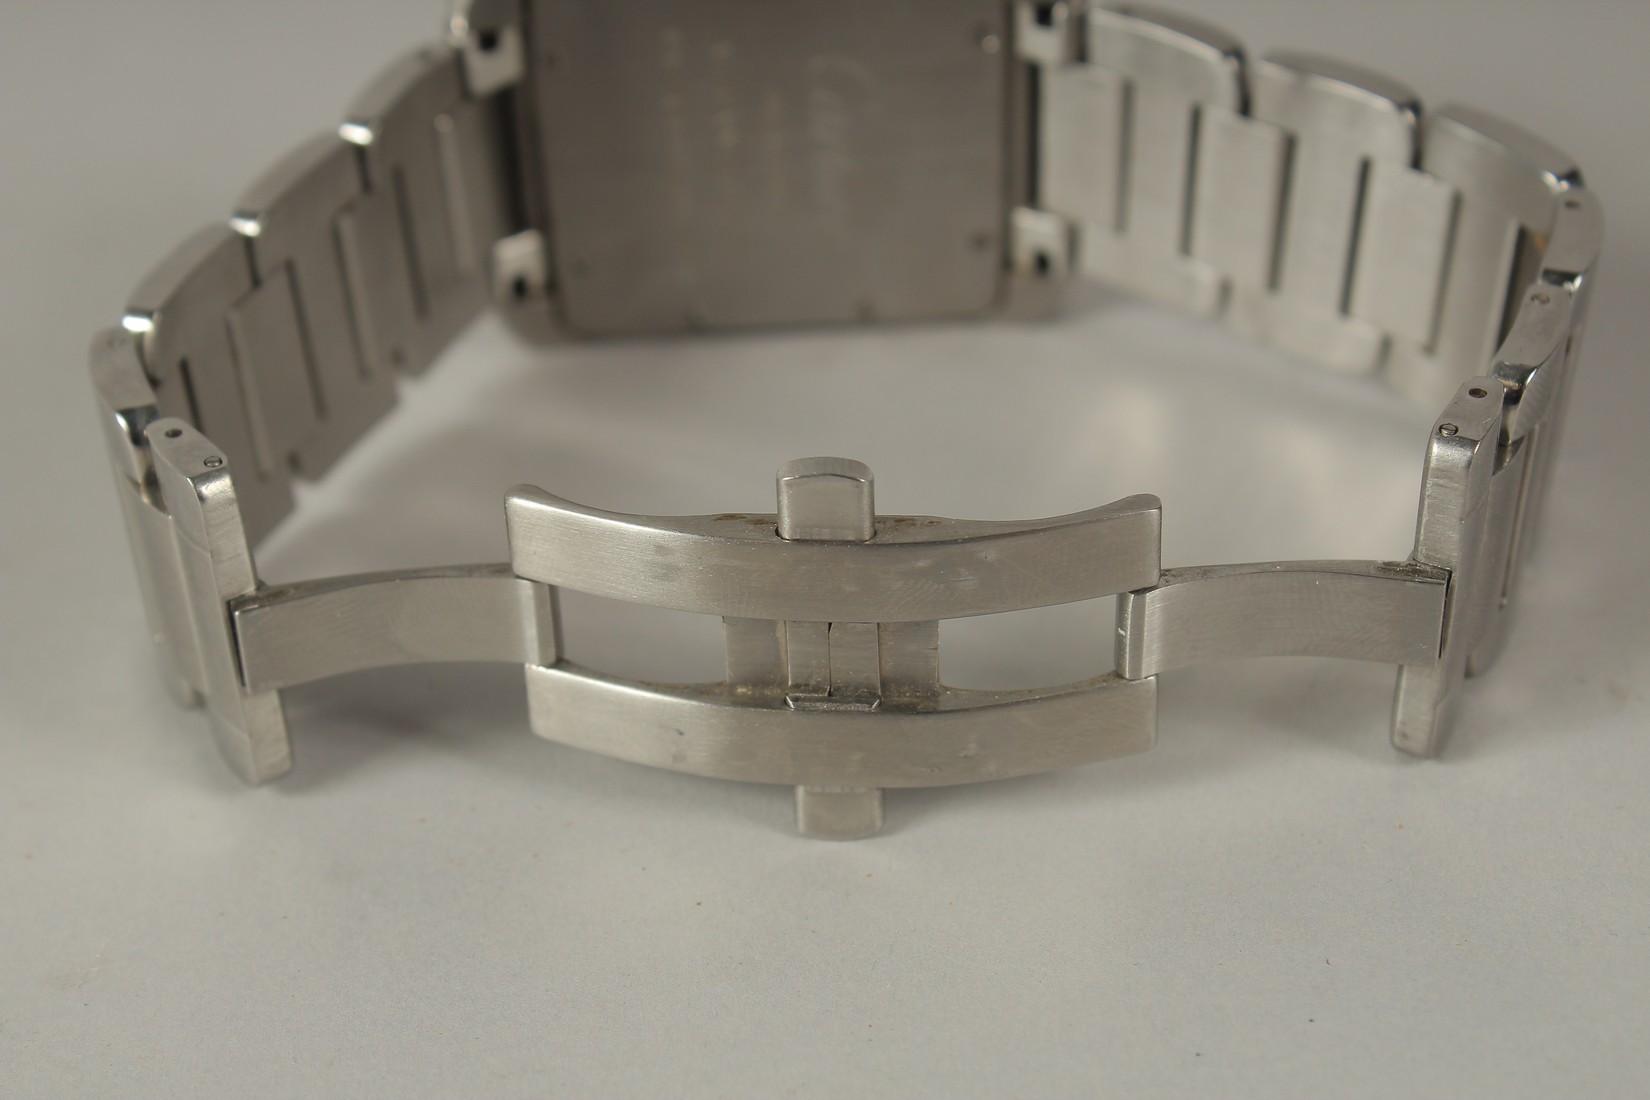 A CARTIER SWISS MADE STAINLESS STEEL WRISTWATCH, water resistant, 3 ATM, four dials, mother-of-pearl - Image 5 of 10